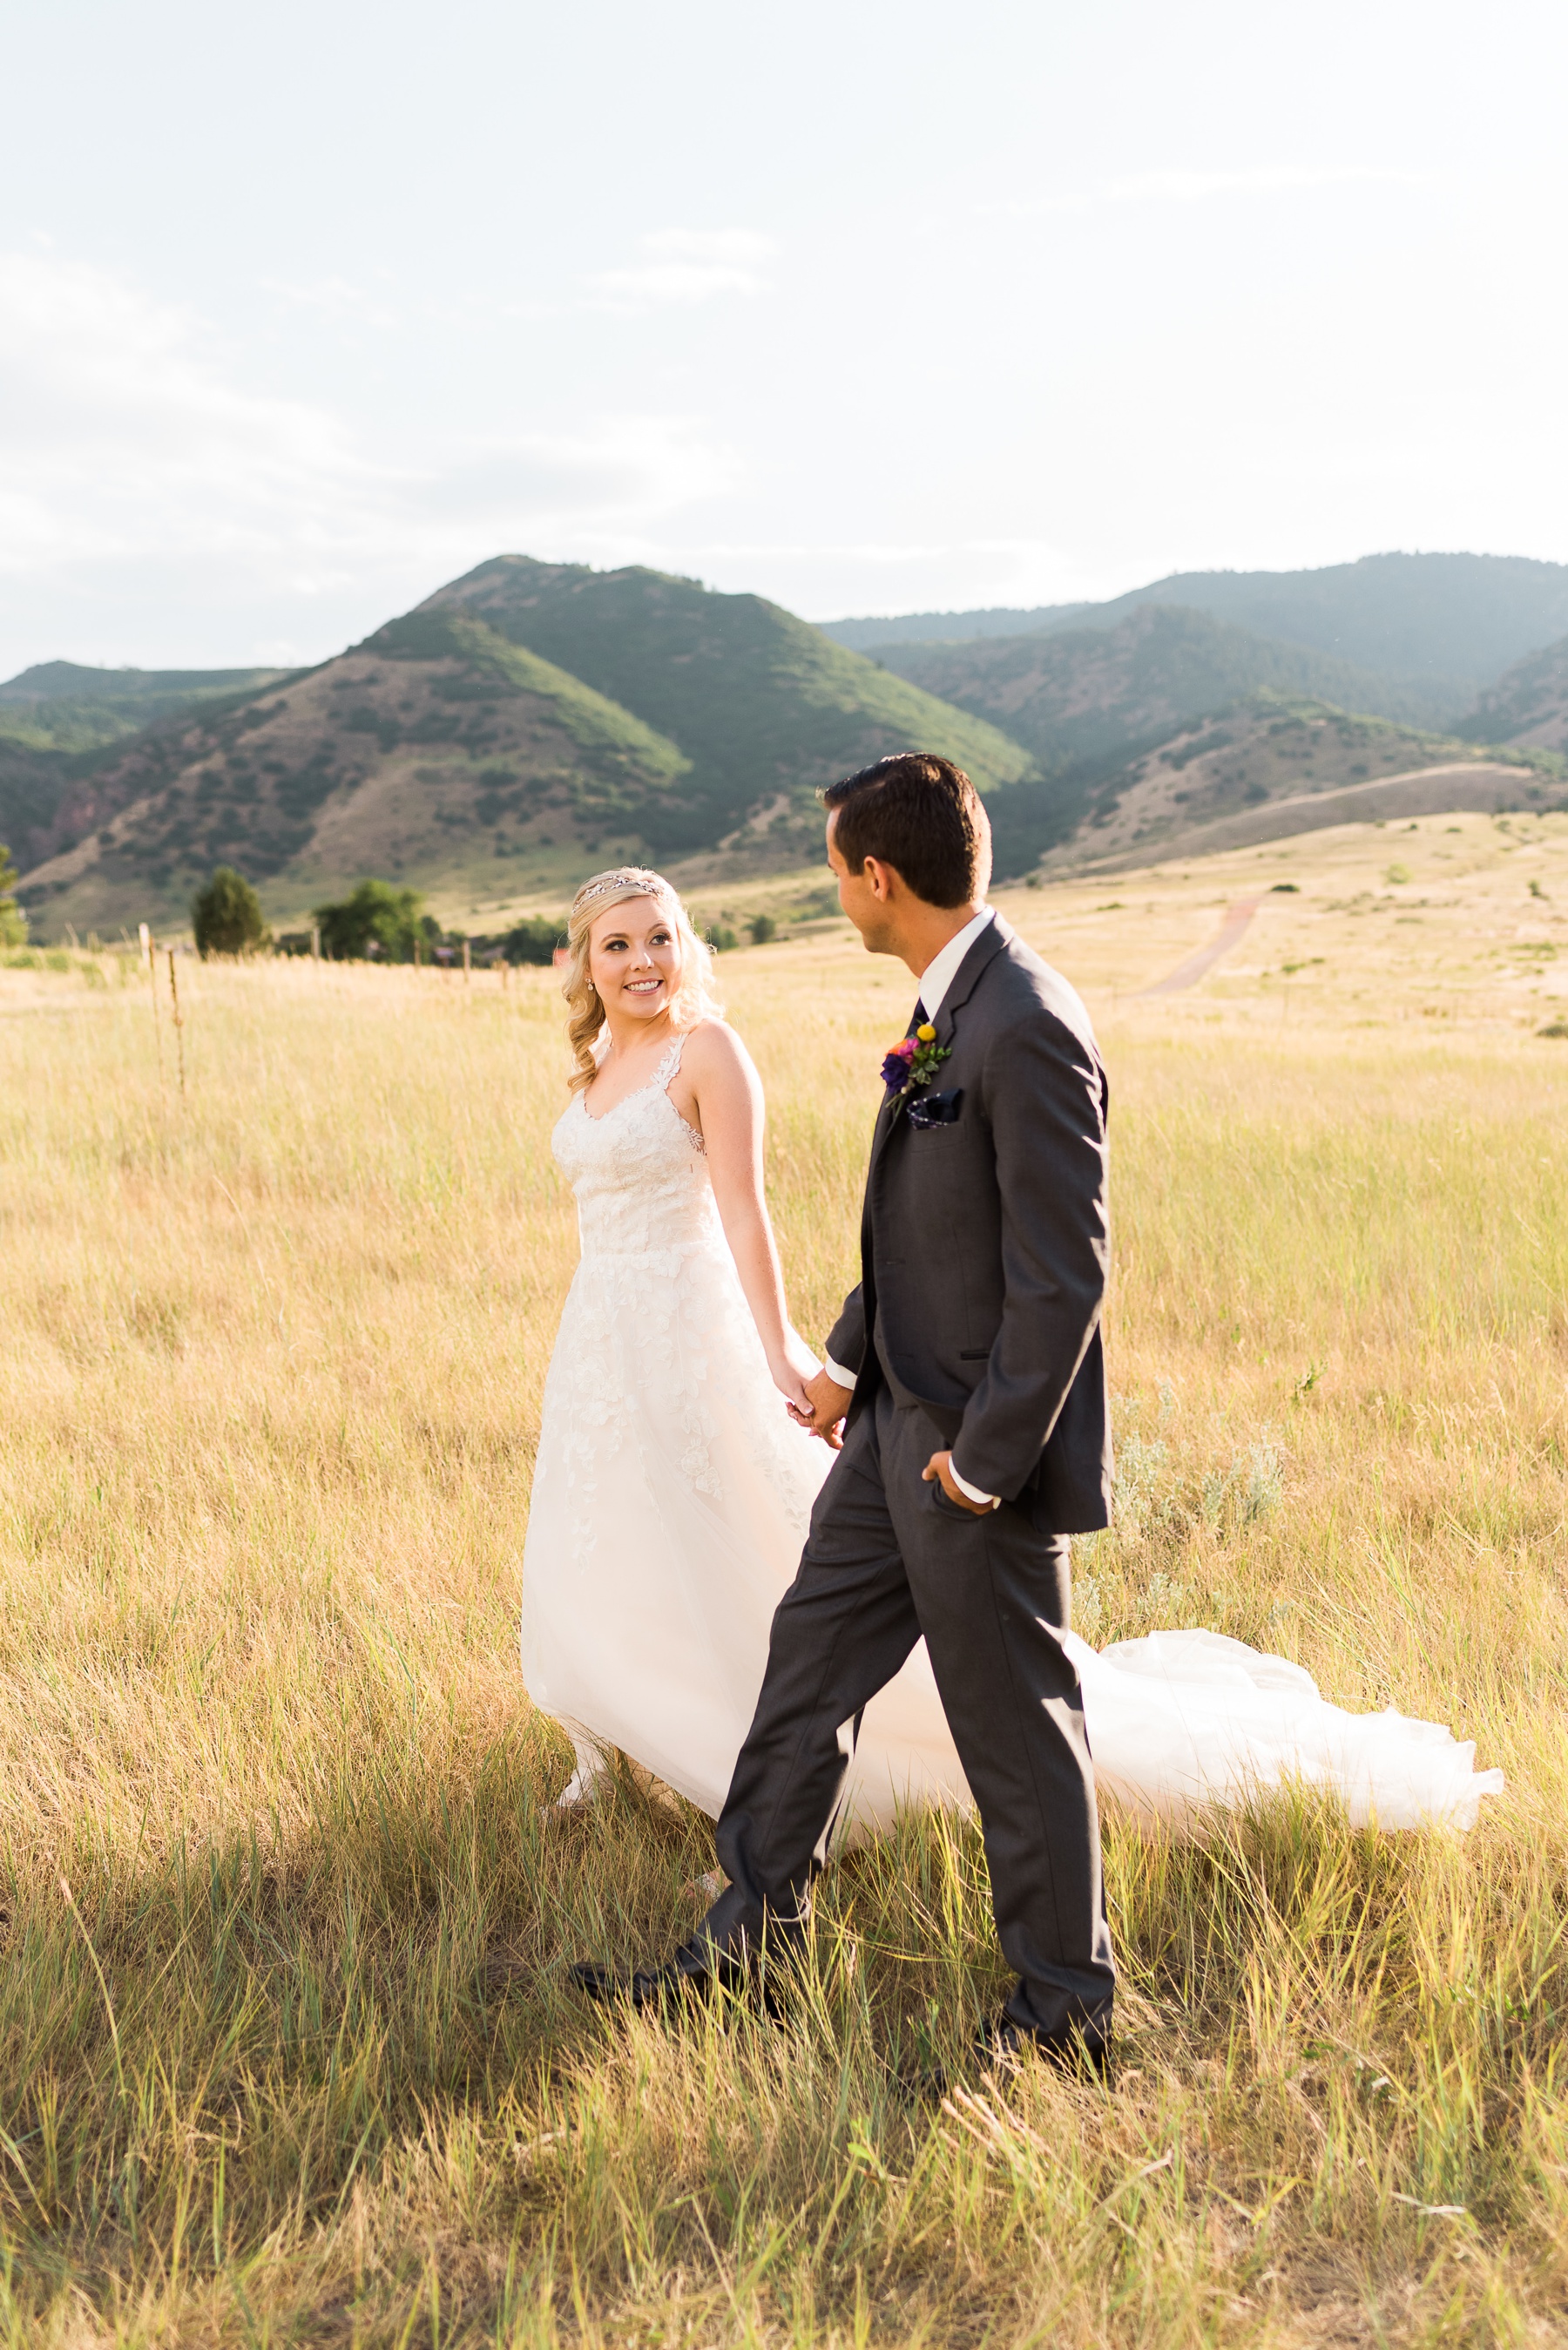 Denver Wedding at The Manor House